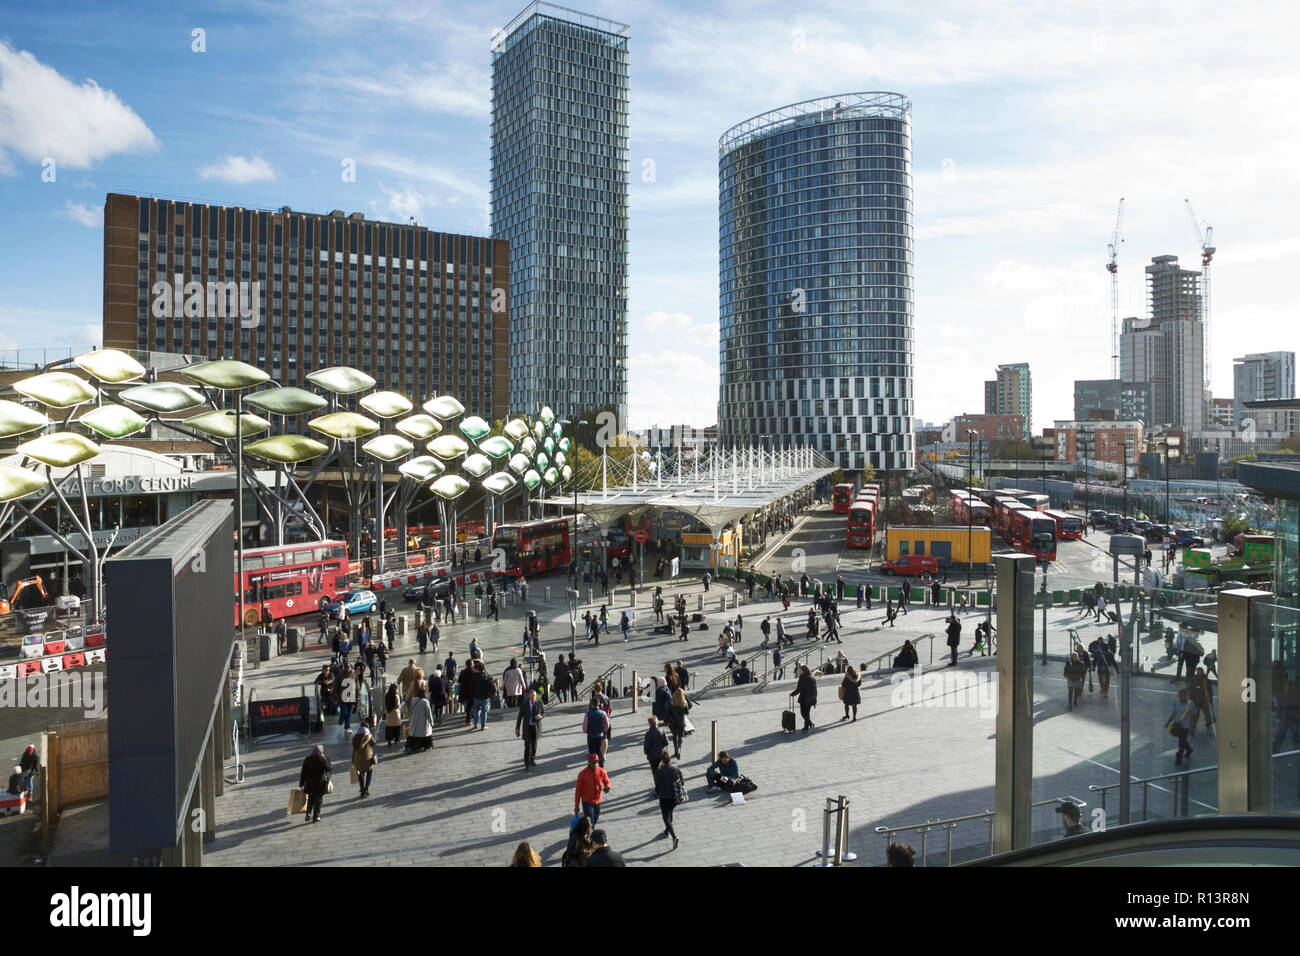 Stratford London transport infrastructure - London Stratford bus station, and the Shoal Artwork, and Stratford Shopping Centre (on the left). Stock Photo